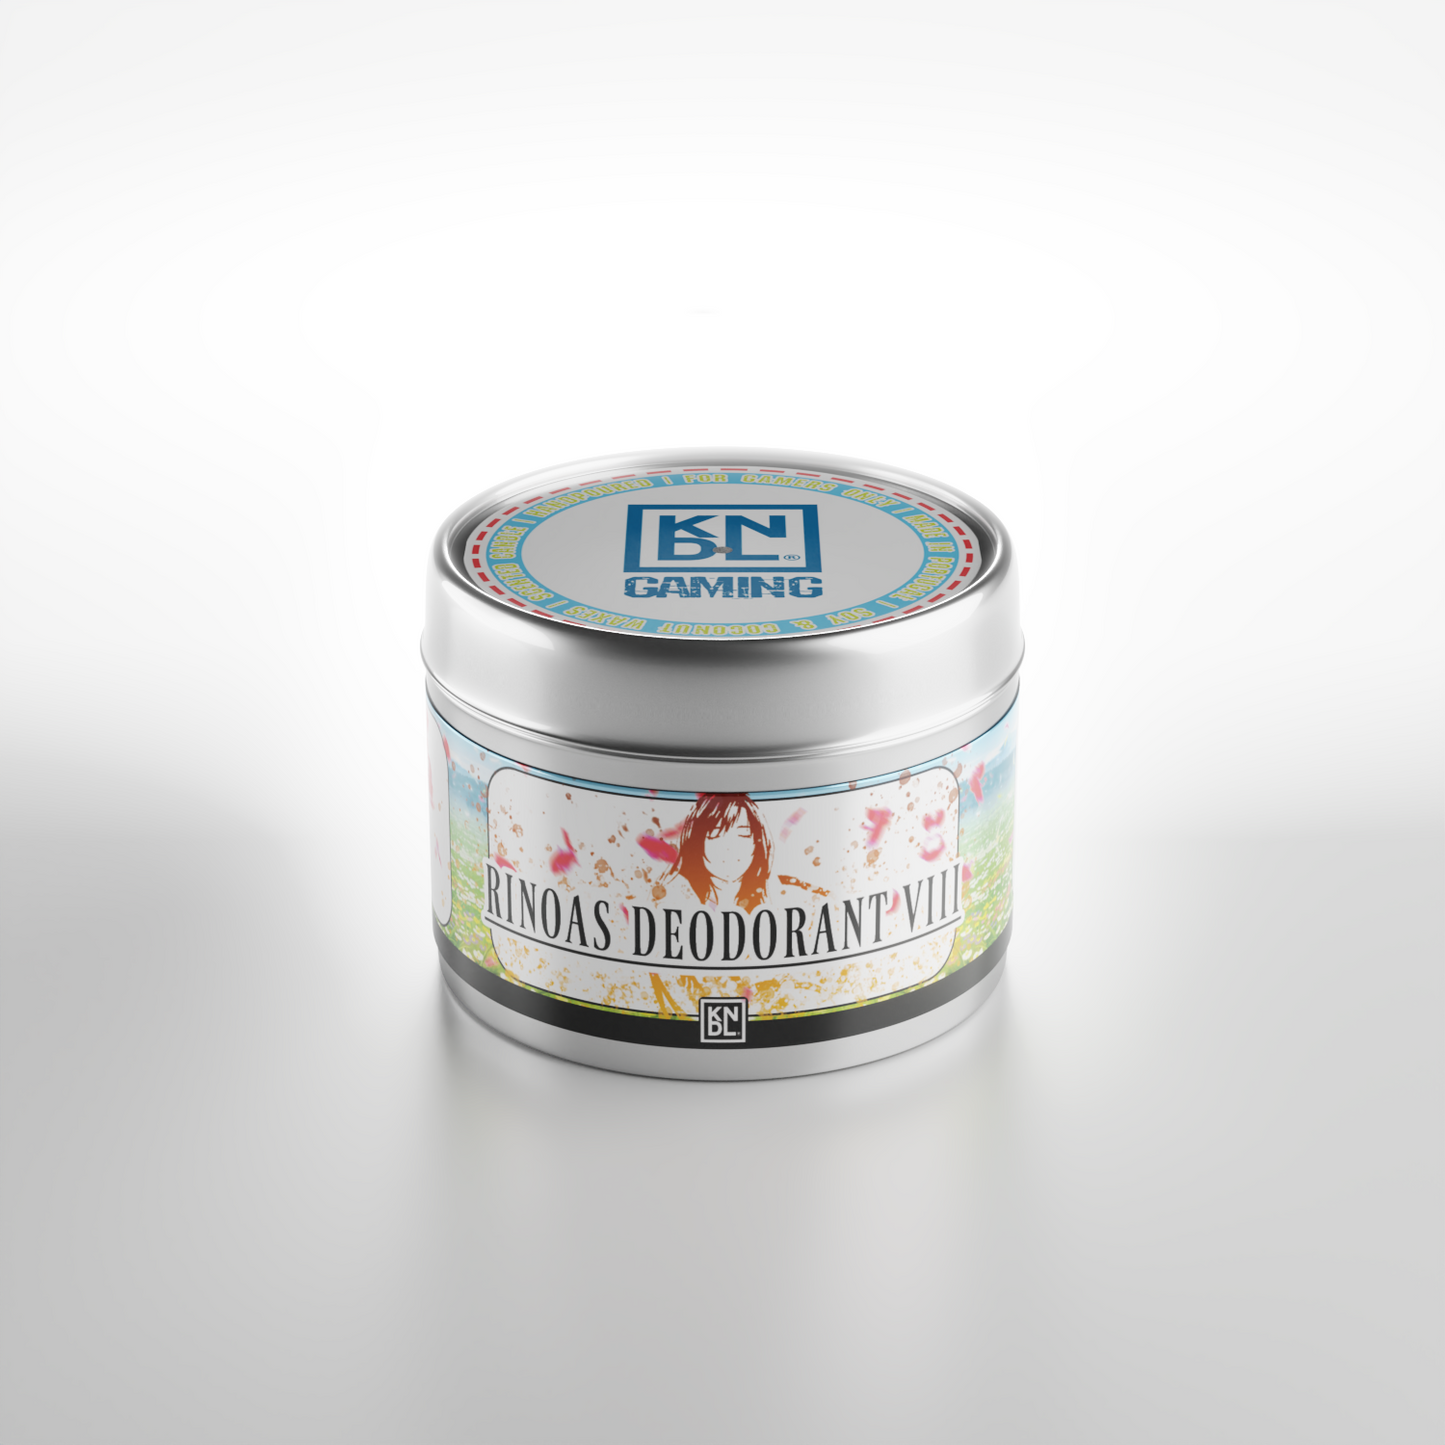 TIN NR 18 | RINOA'S DEODORANT | FINAL FANTASY INSPIRED SCENTED CANDLE